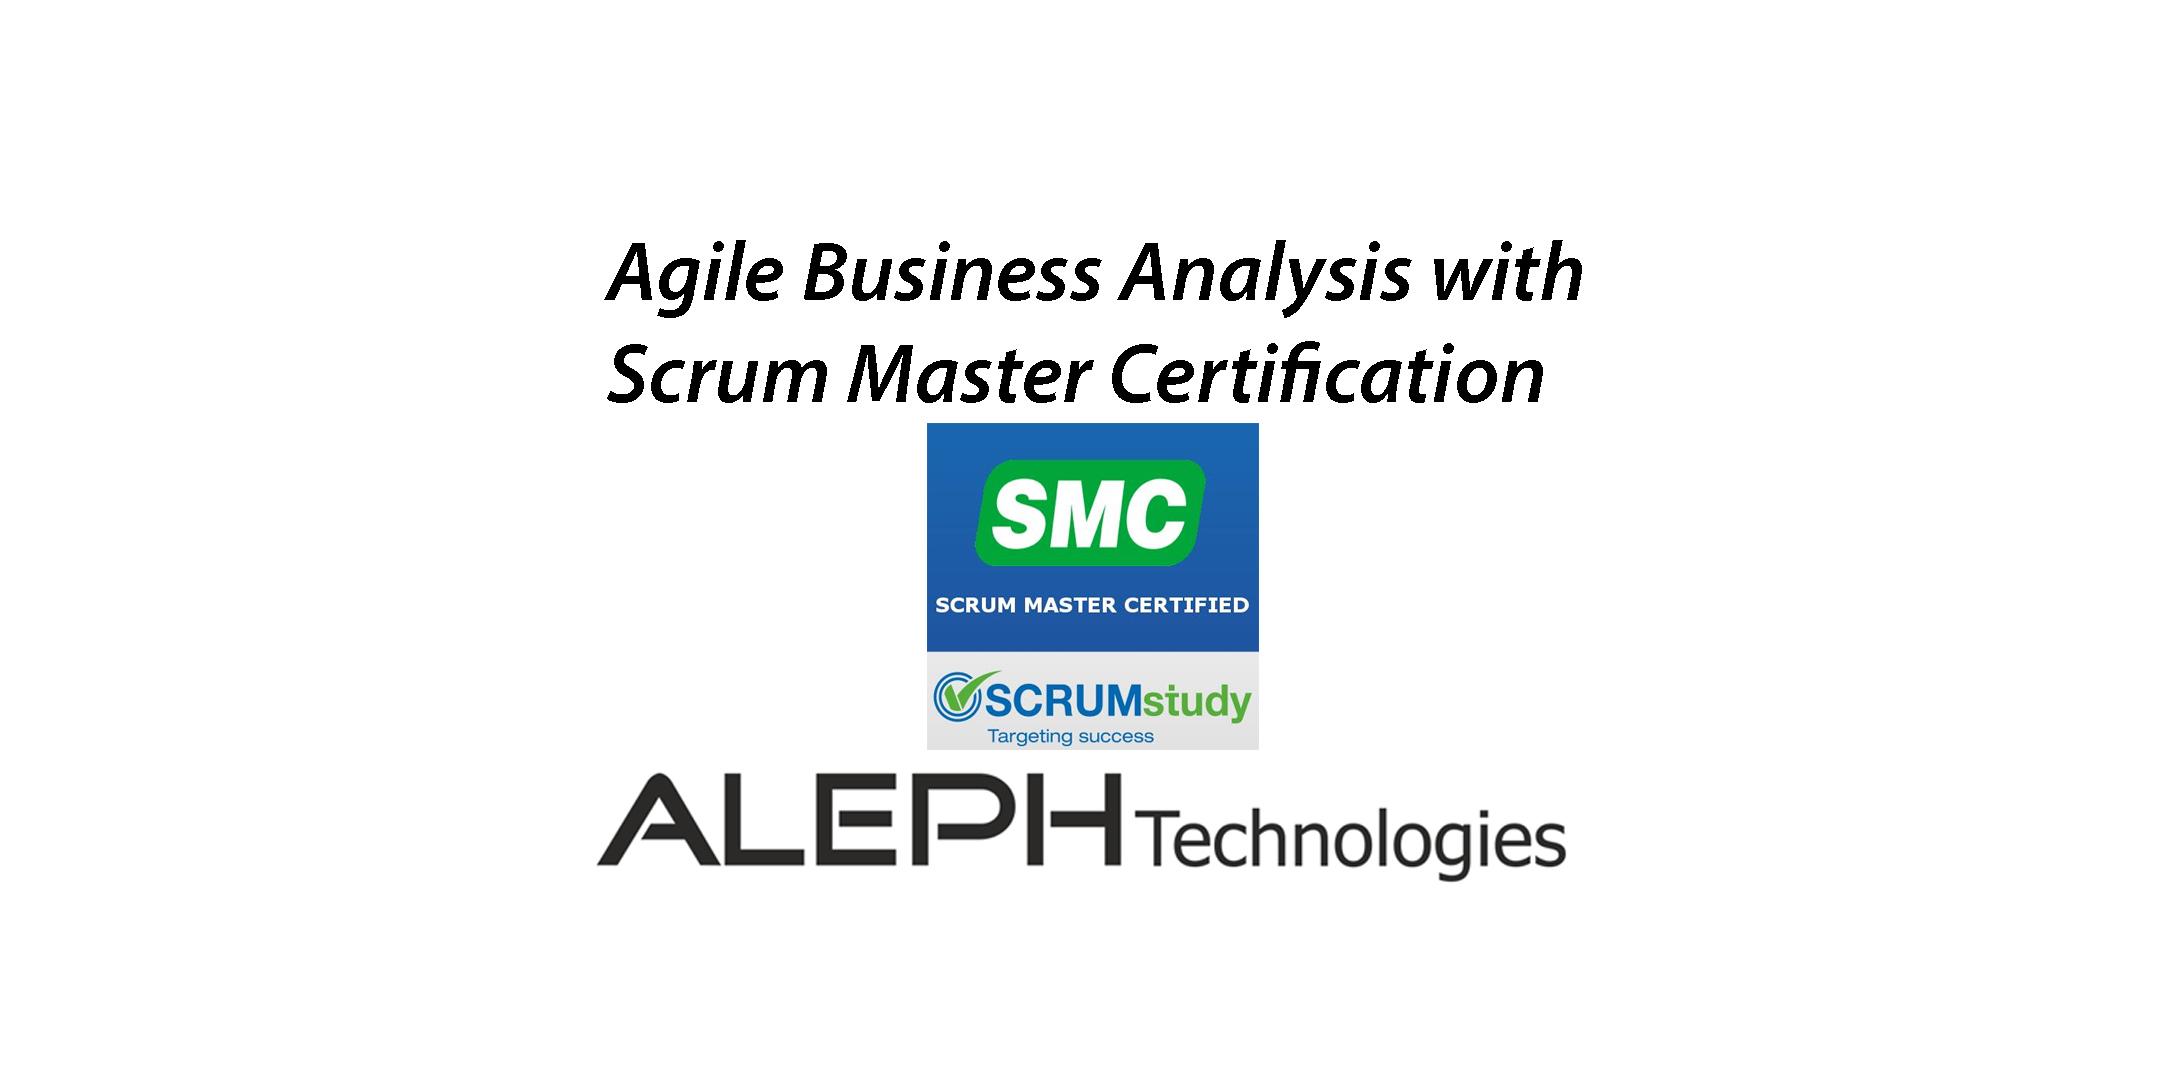 Agile Business Analysis with Scrum Master Certified (SMC™) certification by SCRUMstudy